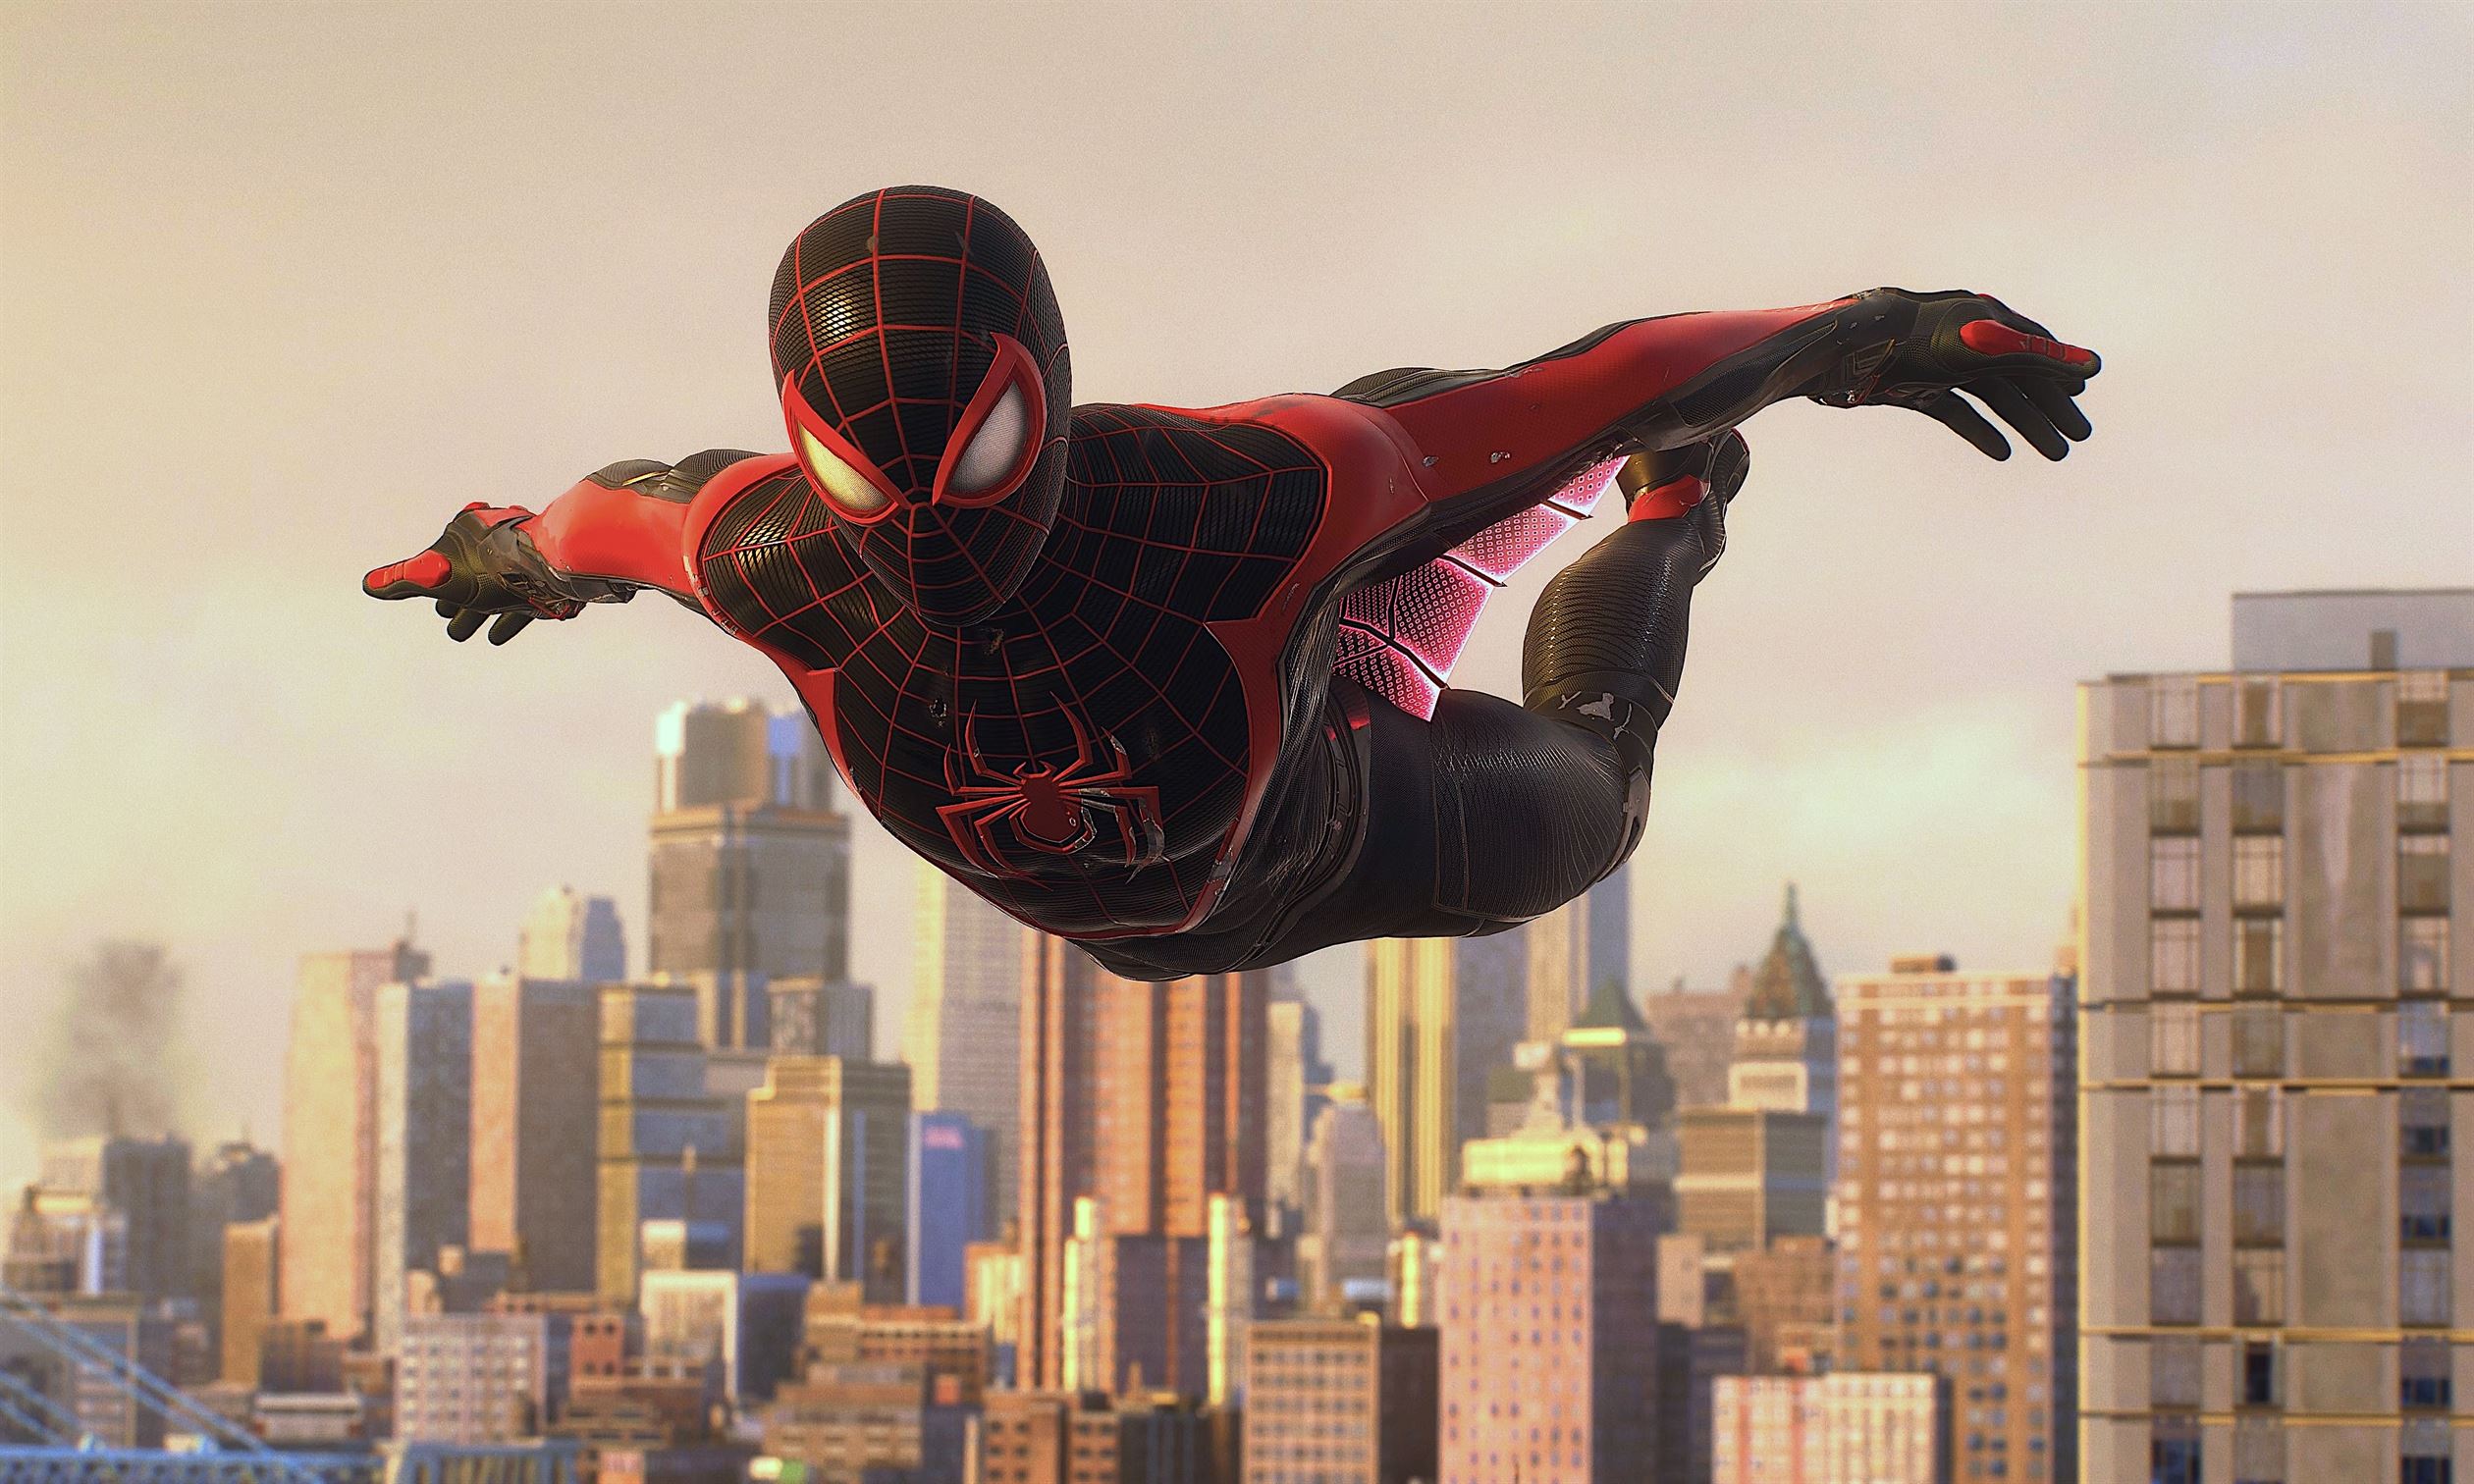 "Web wings" allow players to glide with ease. Photo courtesy of Insomniac Games